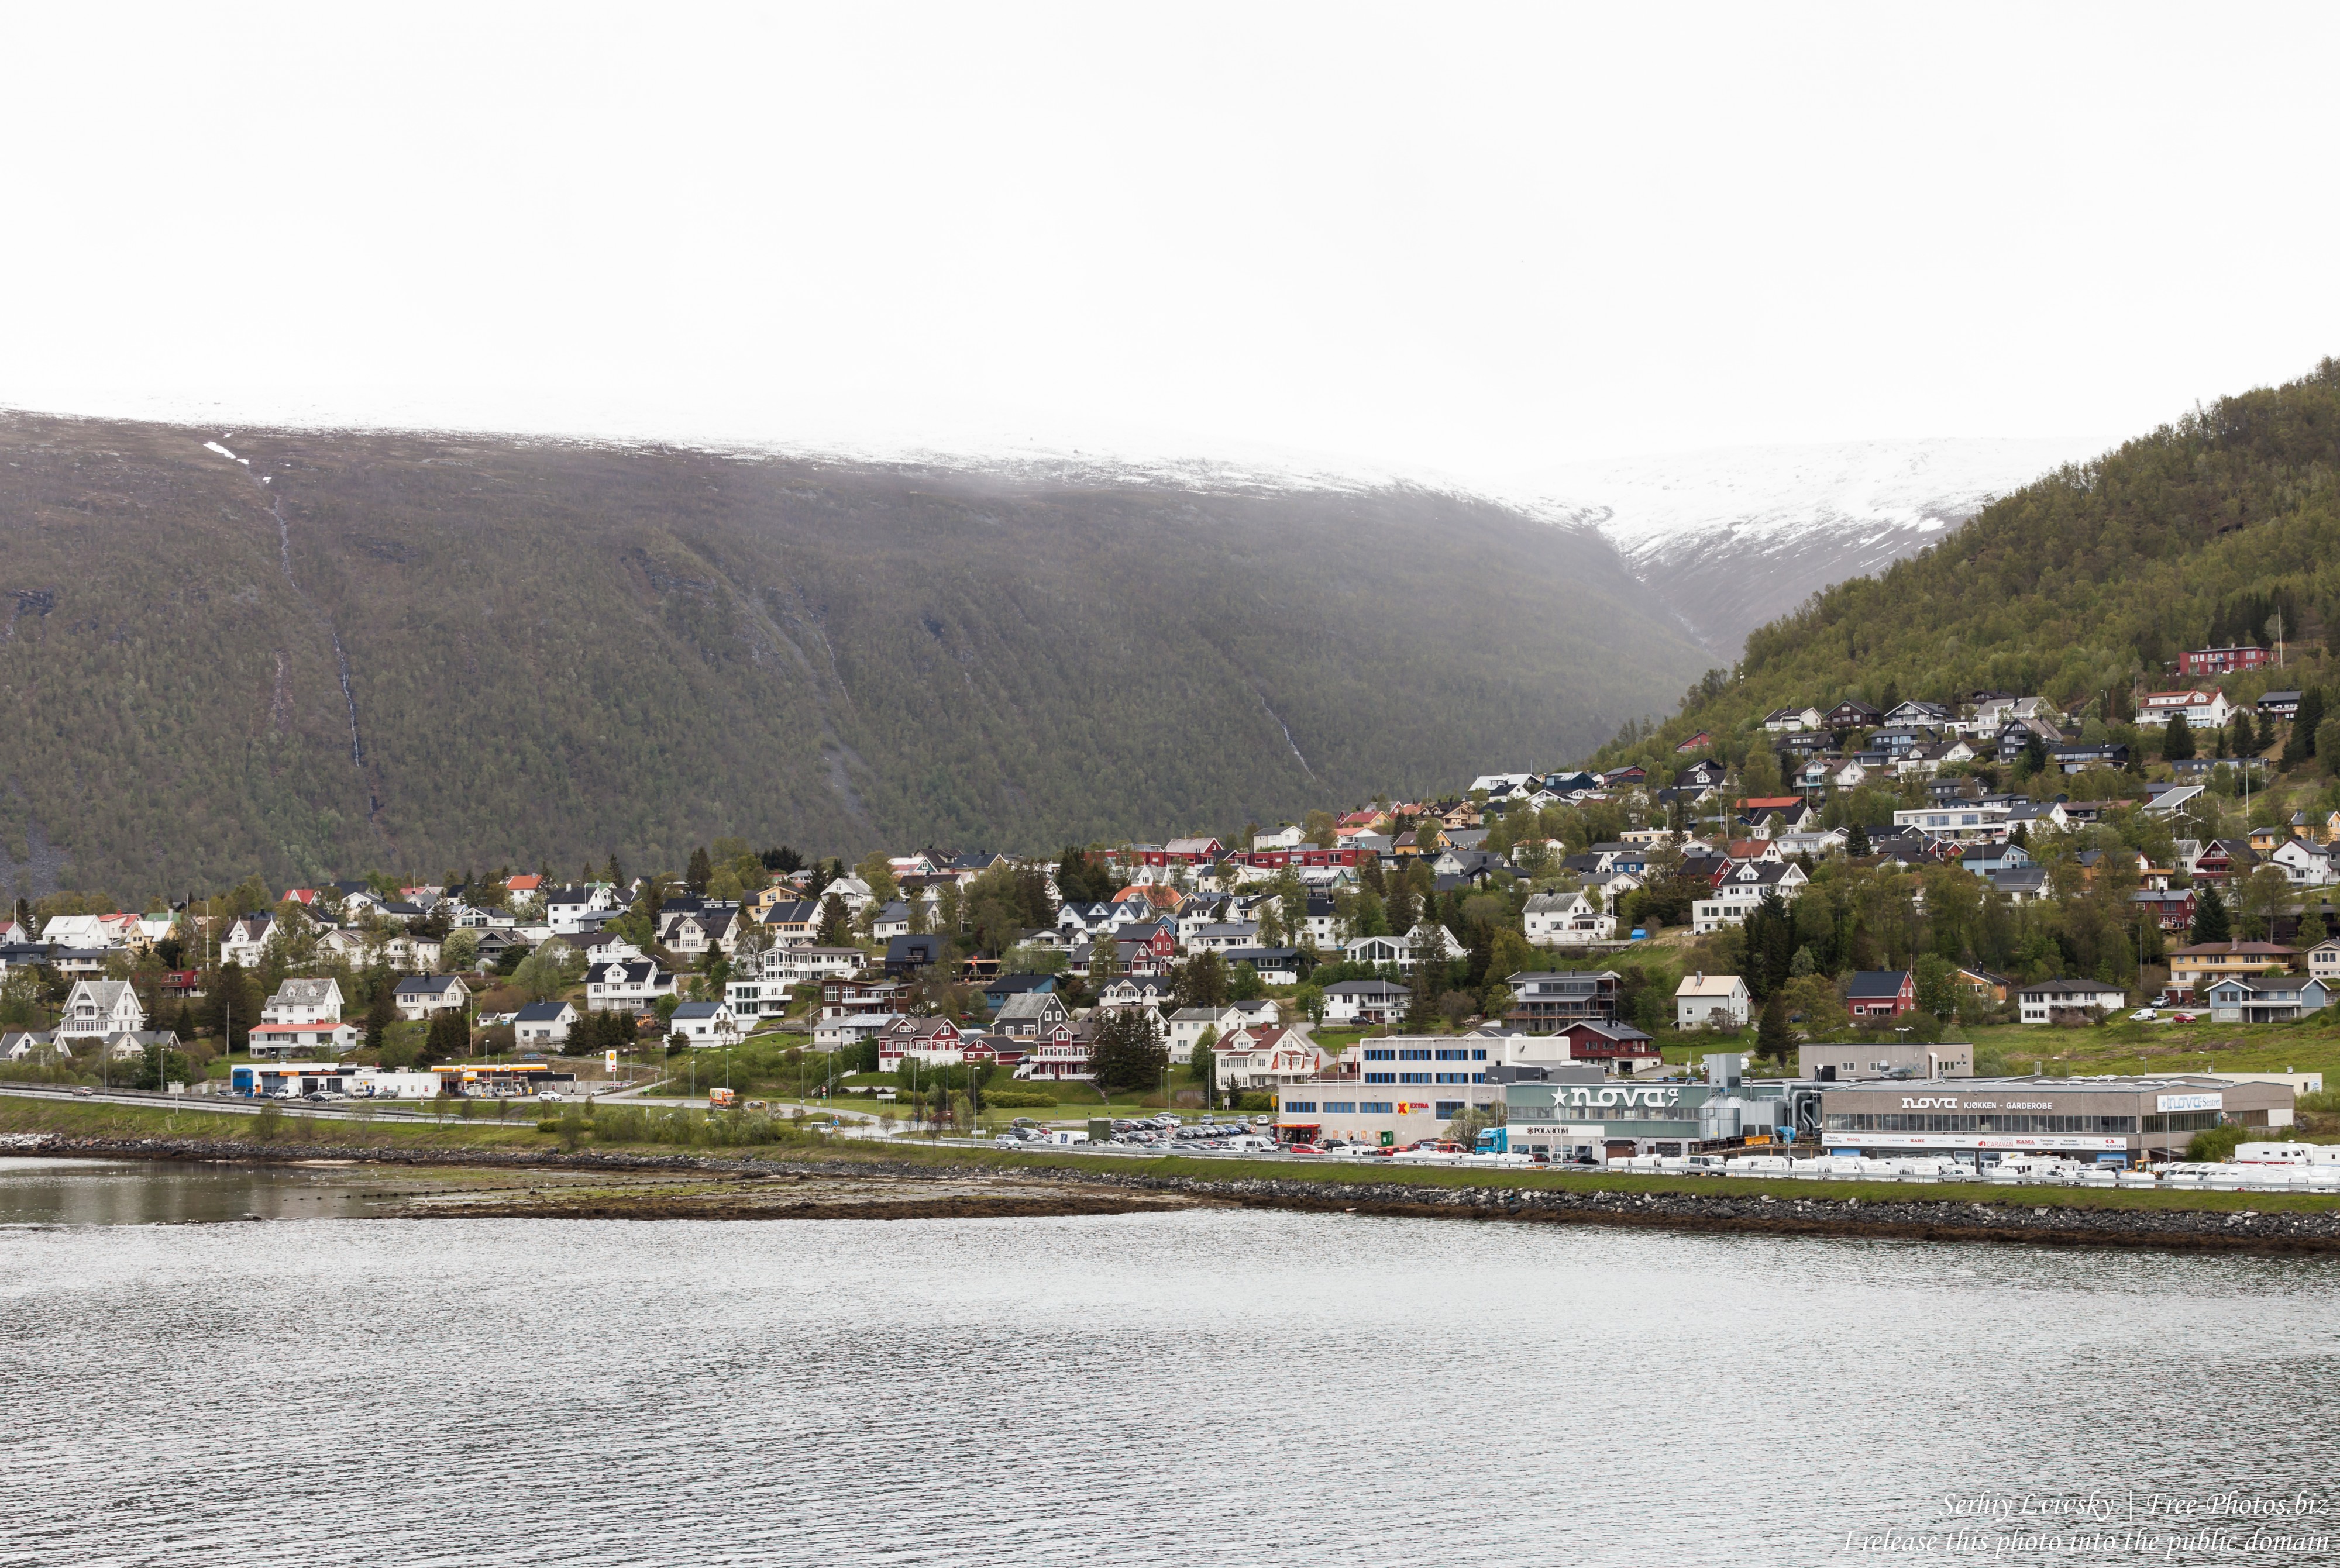 Tromso, Norway, photographed in June 2018 by Serhiy Lvivsky, picture 32